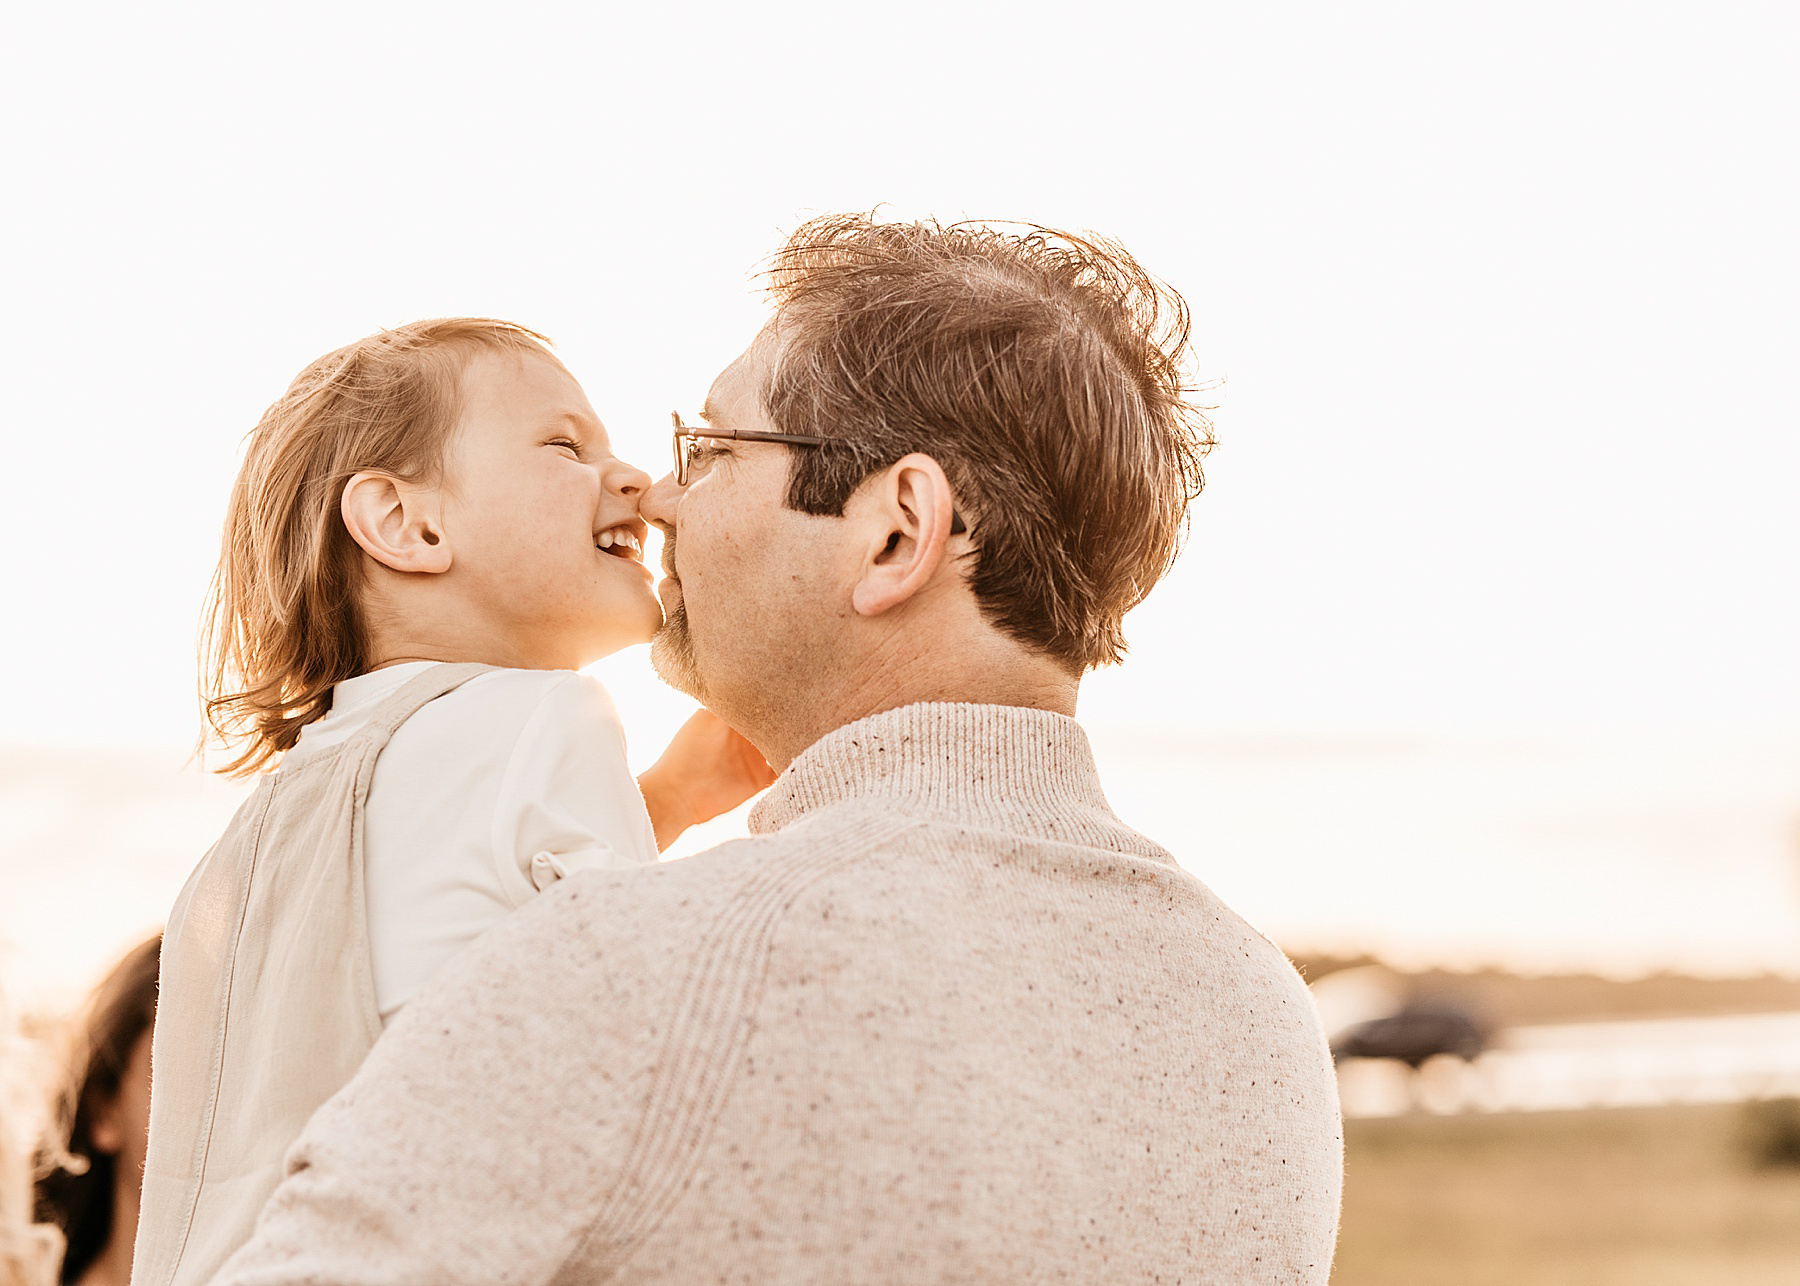 man laughing with little boy in open field dressed in neutral colors